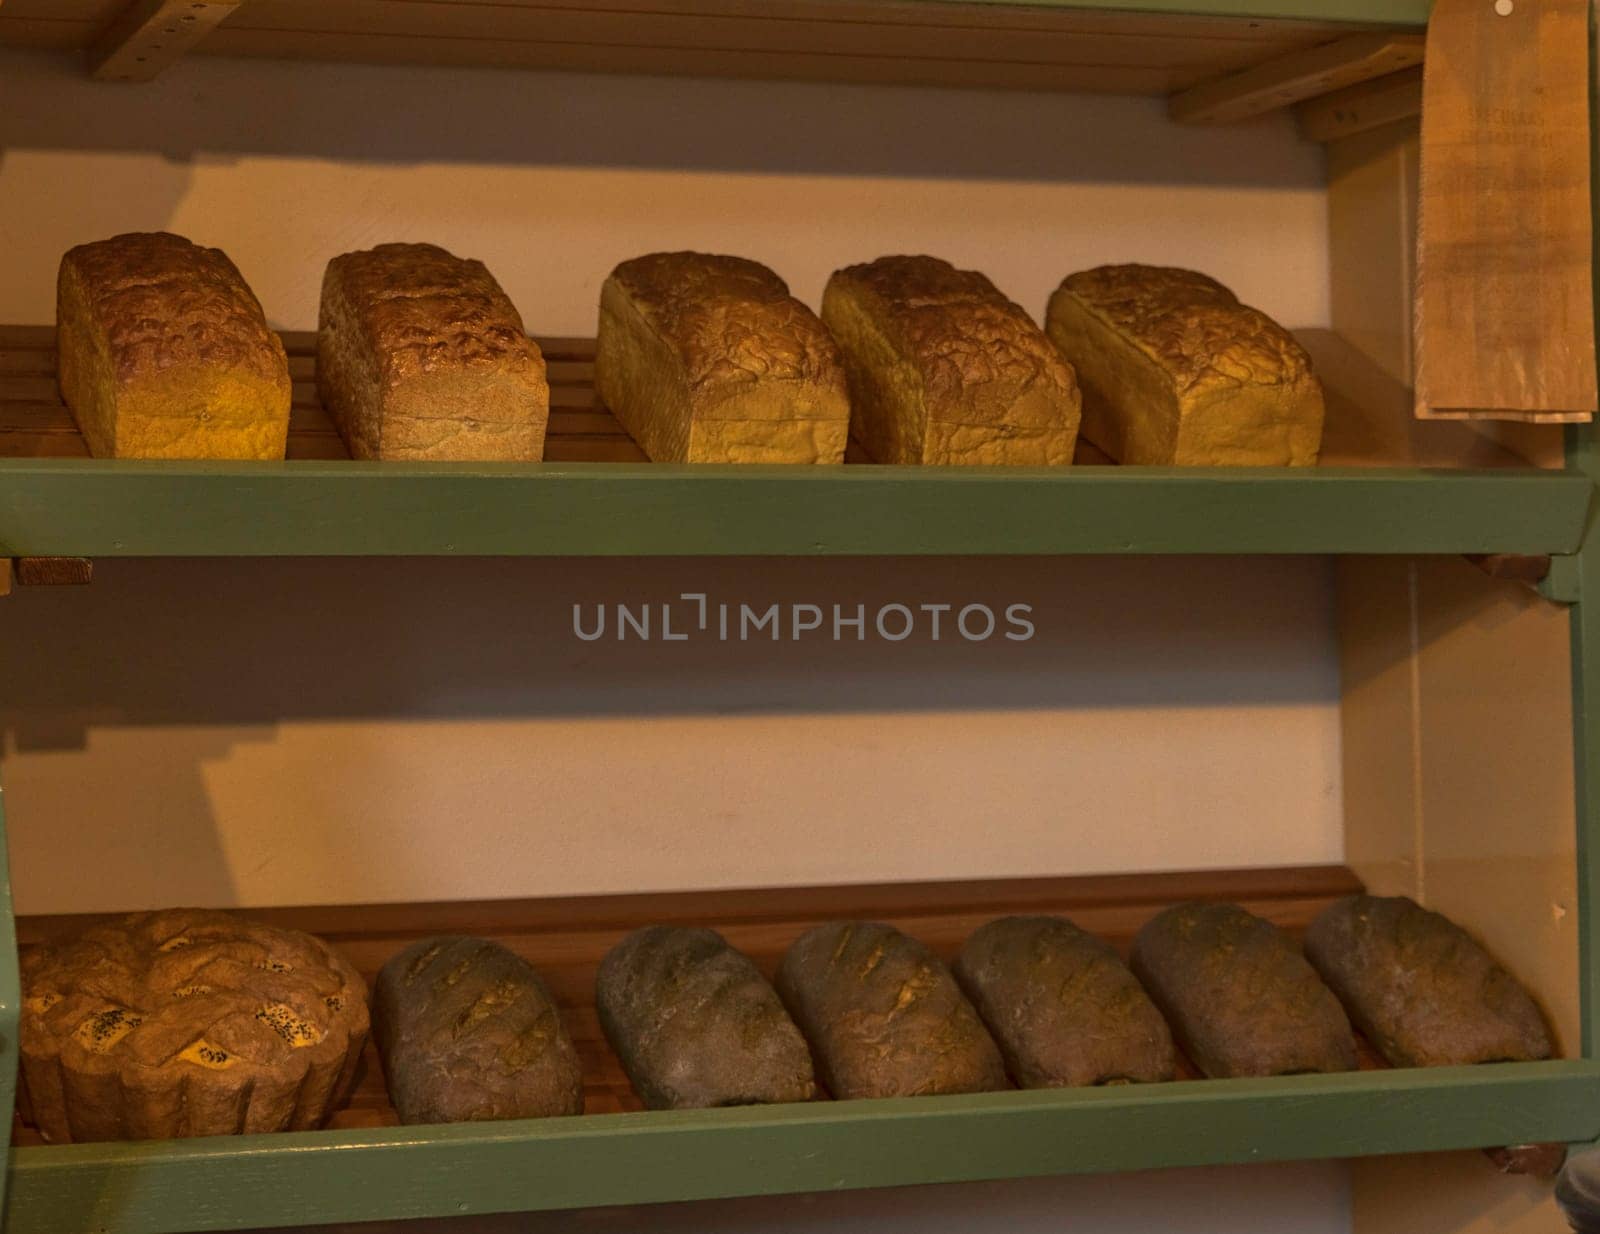 wooden shelfs in a old bakery shop with different kind of bread